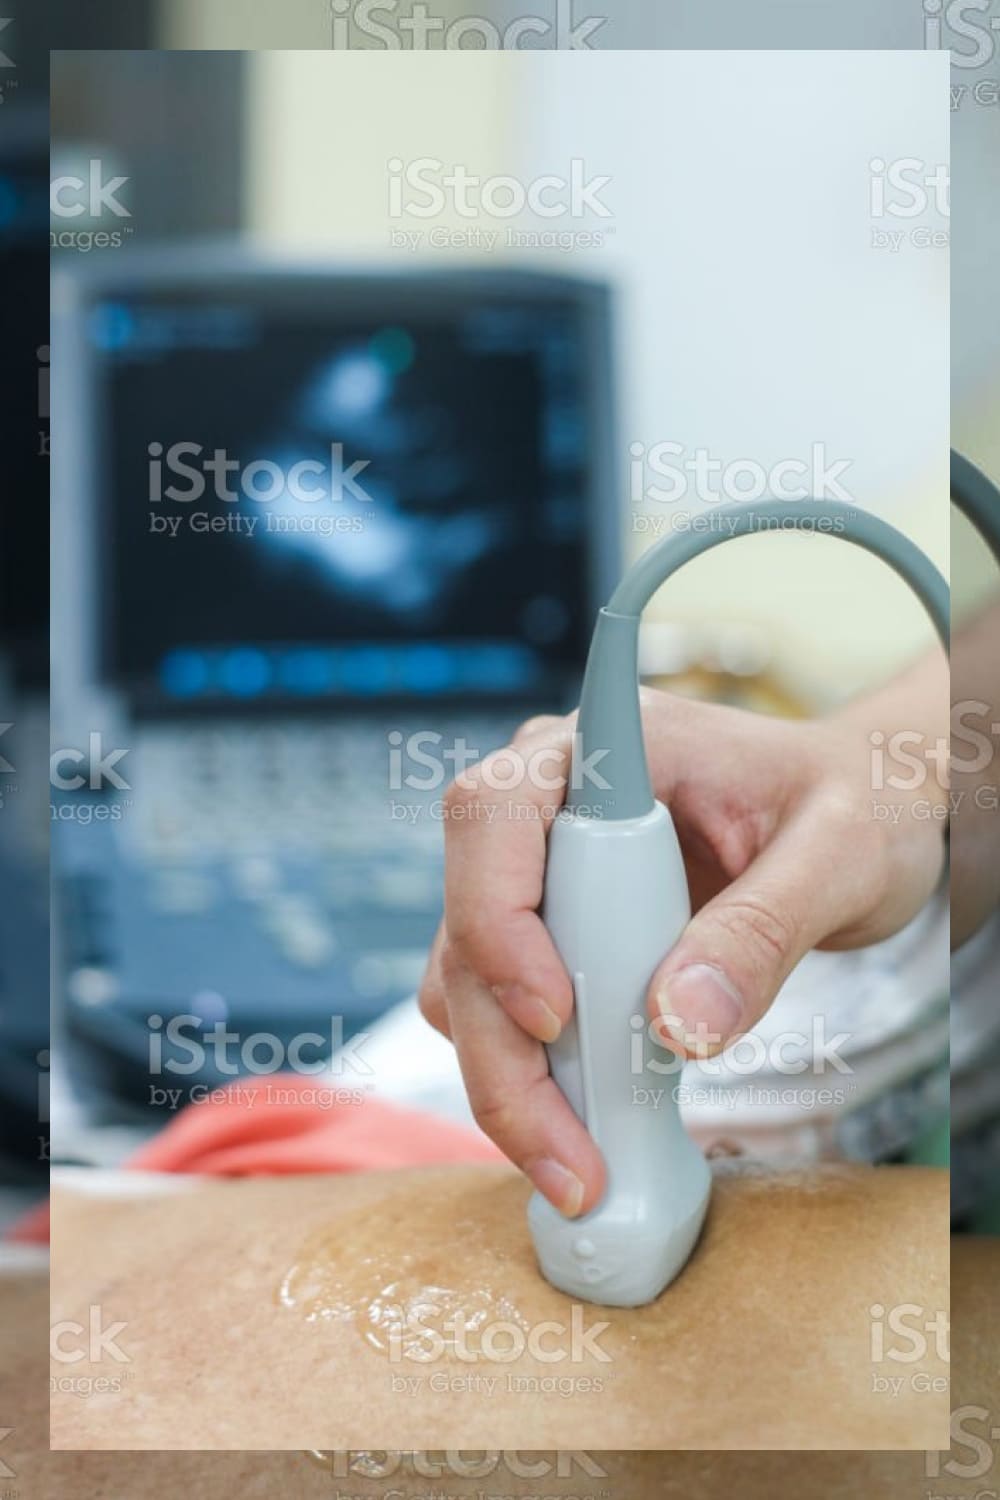 Doctor is examining heart s patient by echocardiogram stock photo.